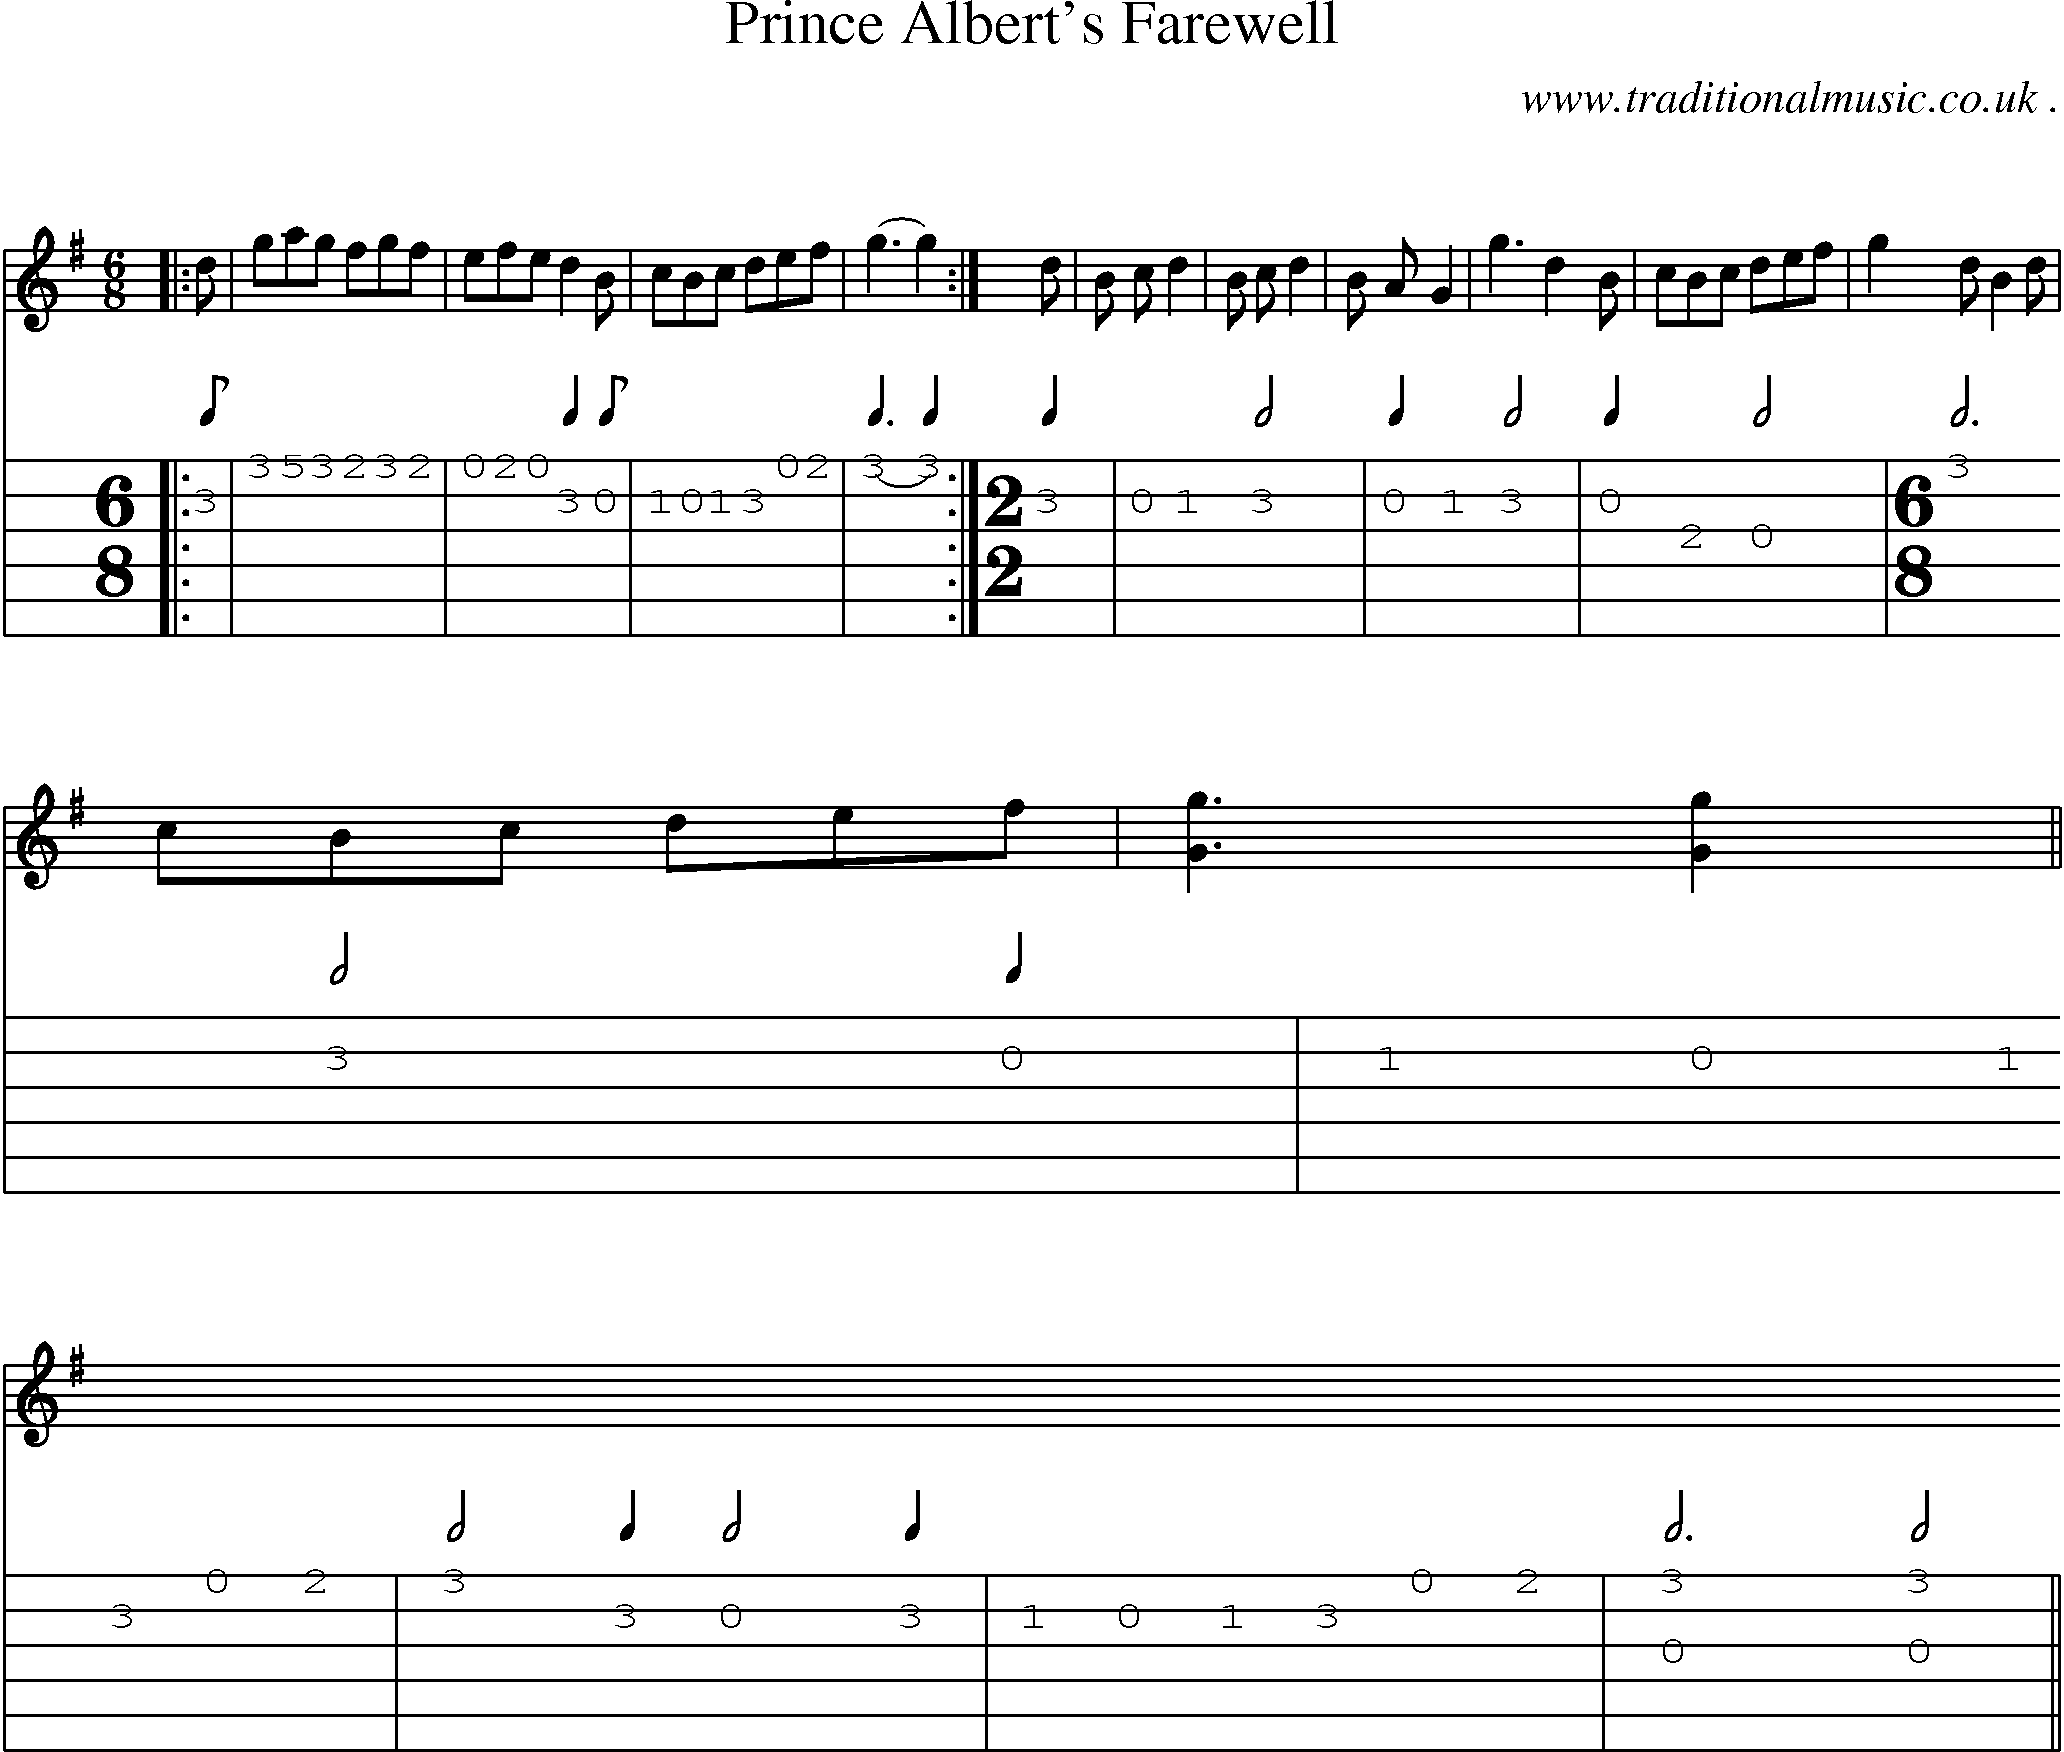 Sheet-music  score, Chords and Guitar Tabs for Prince Alberts Farewell